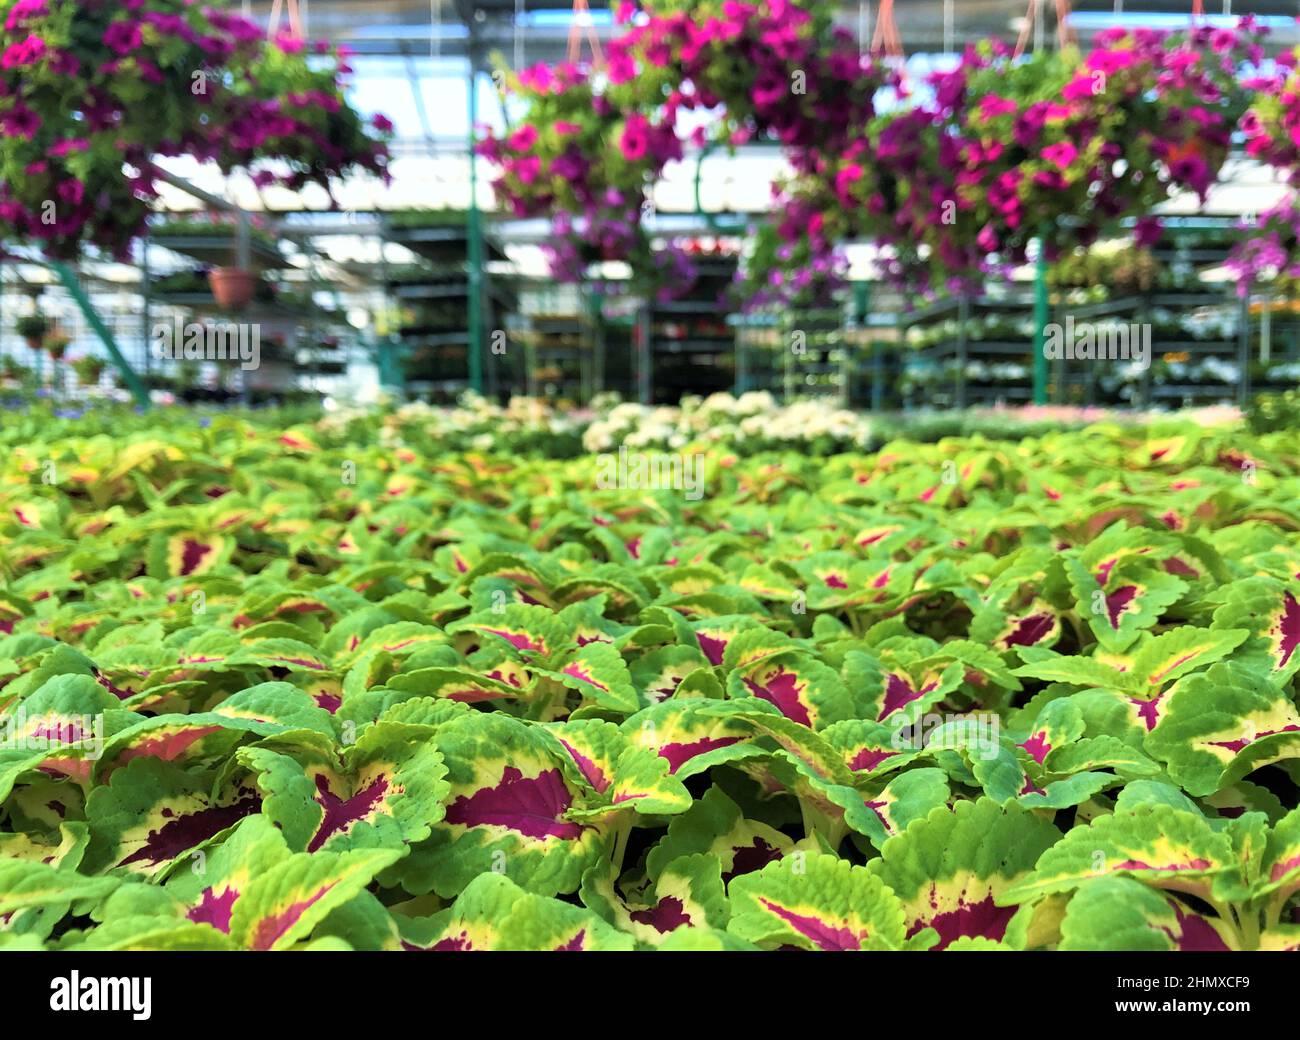 In the greenhouse: flower pots with bright green Coleus, hanging from the top of tradescantia on blurred background. Stock Photo